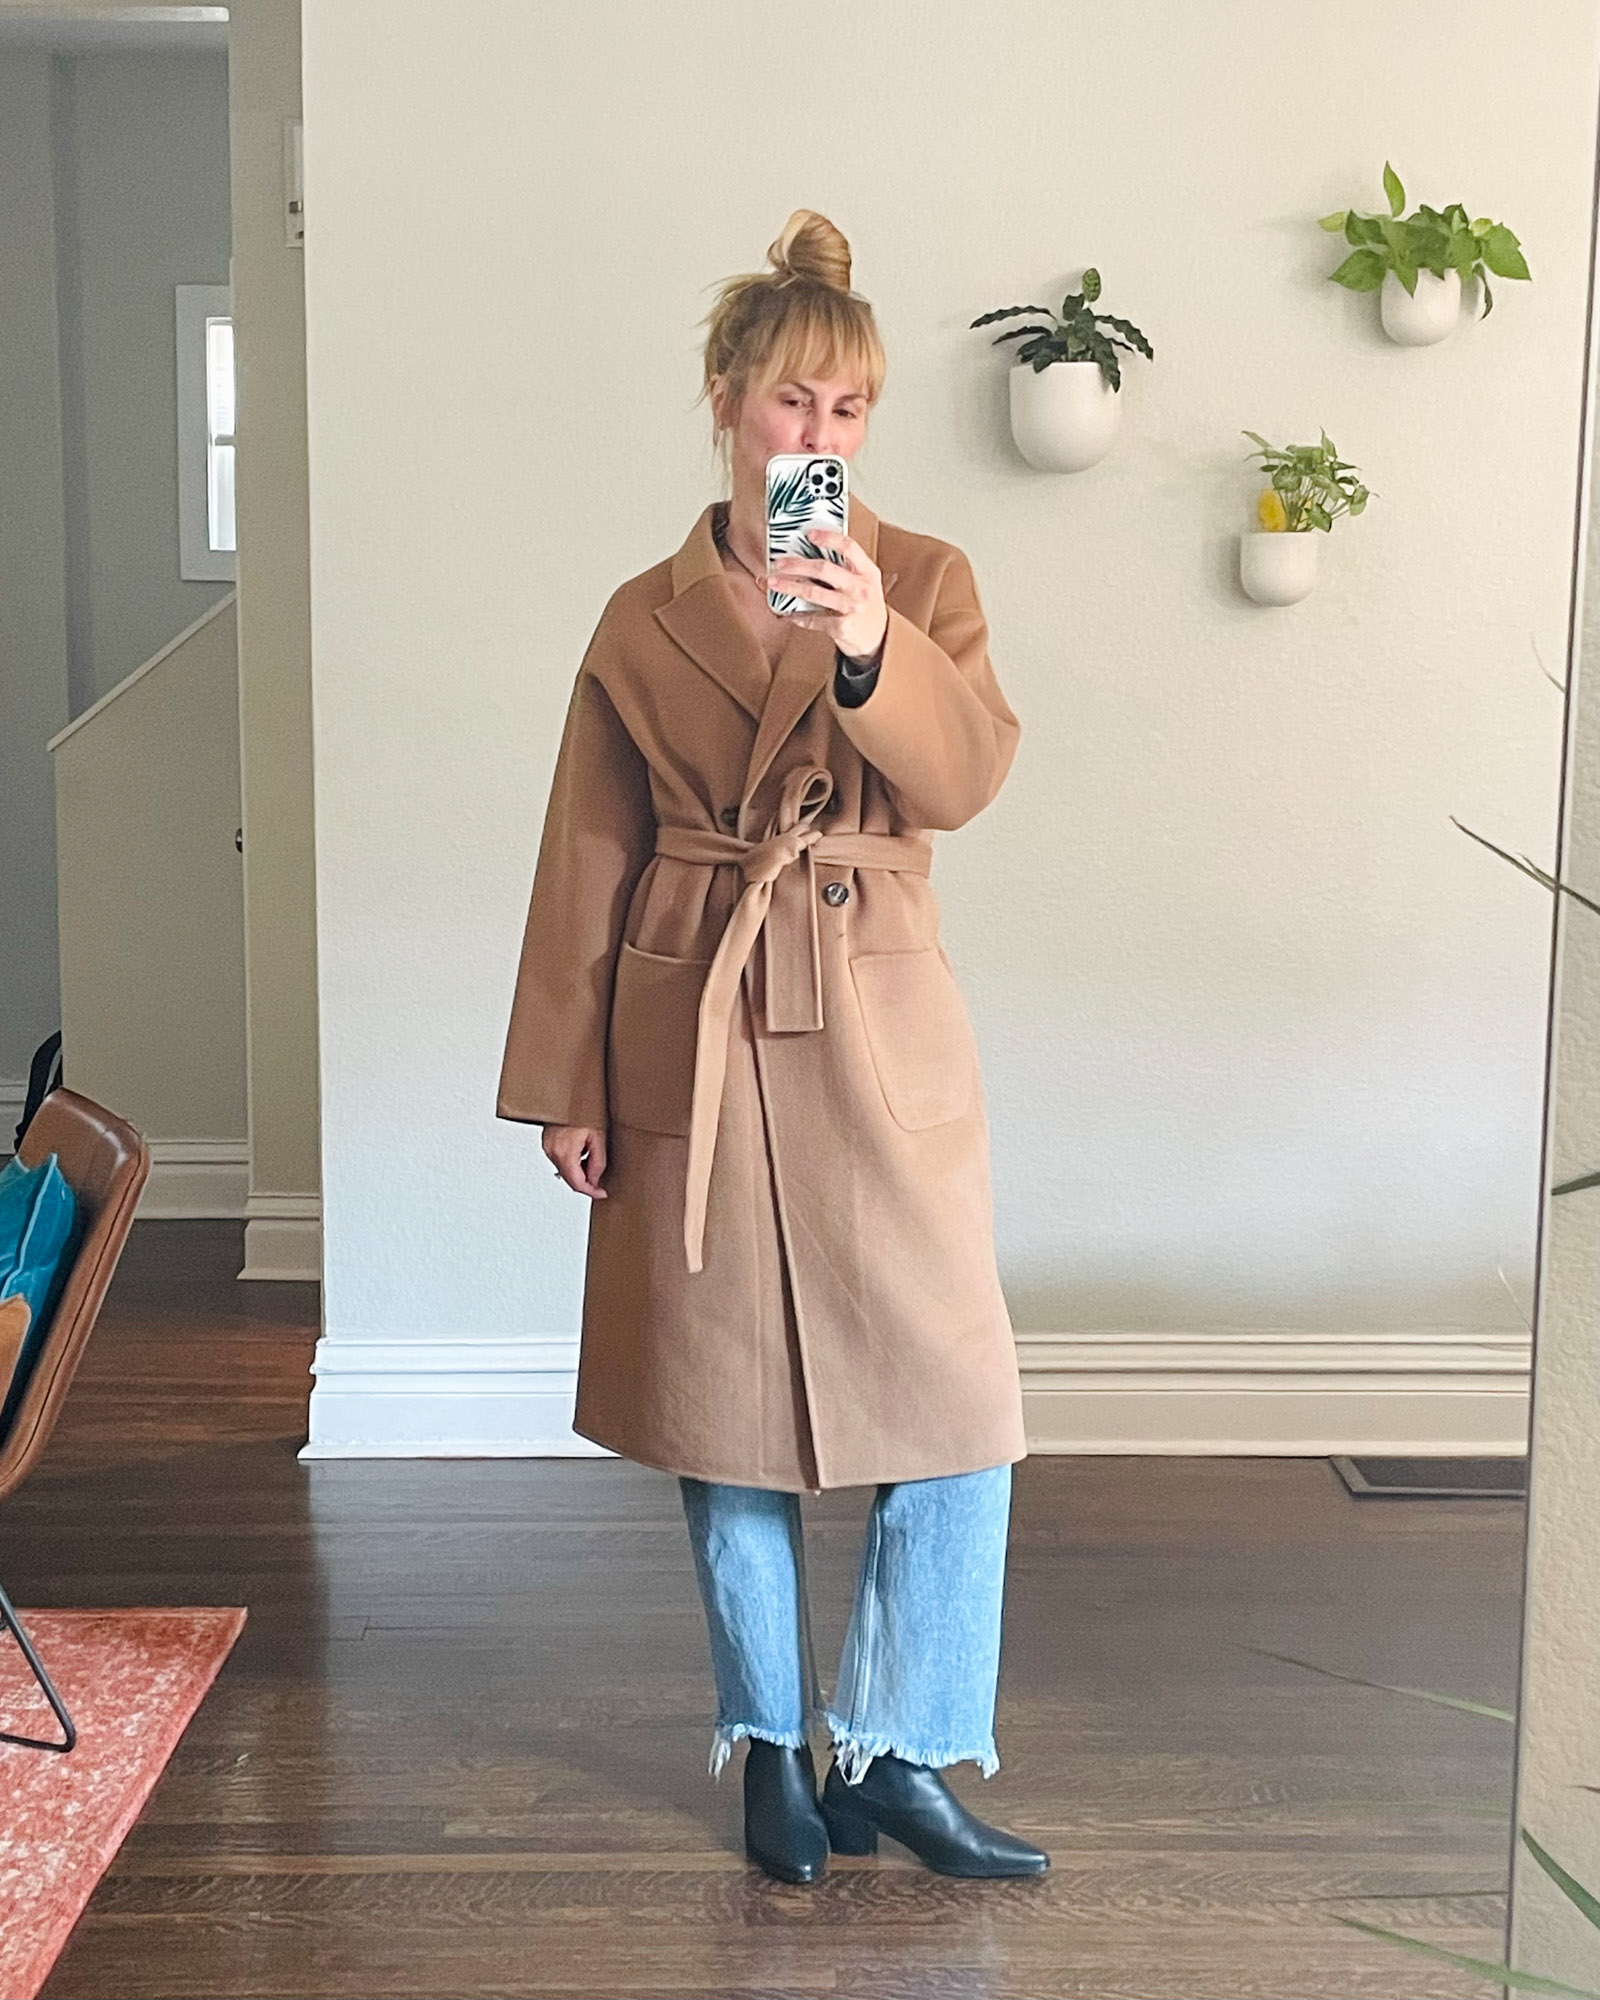 Wearing the Anine Bing Dylan camel coat with Moussy vintage jeans and Frame Lexington chelsea boots.